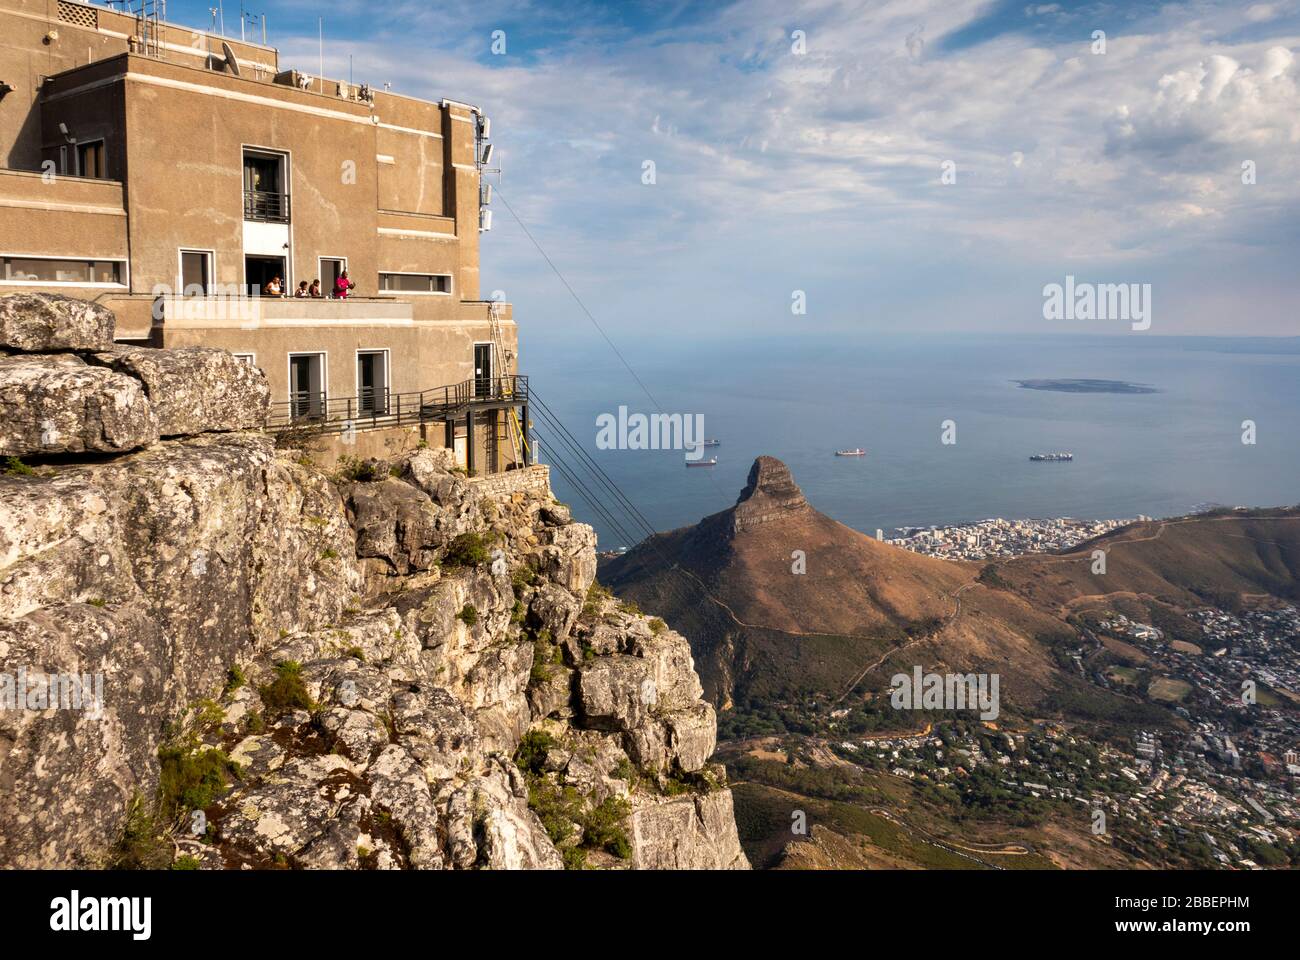 South Africa, Cape Town, Tafelberg Road, Table Mountain, elevated view of upper Aerial Cableway station with Robben Island in Atlantic Ocean beyond Li Stock Photo